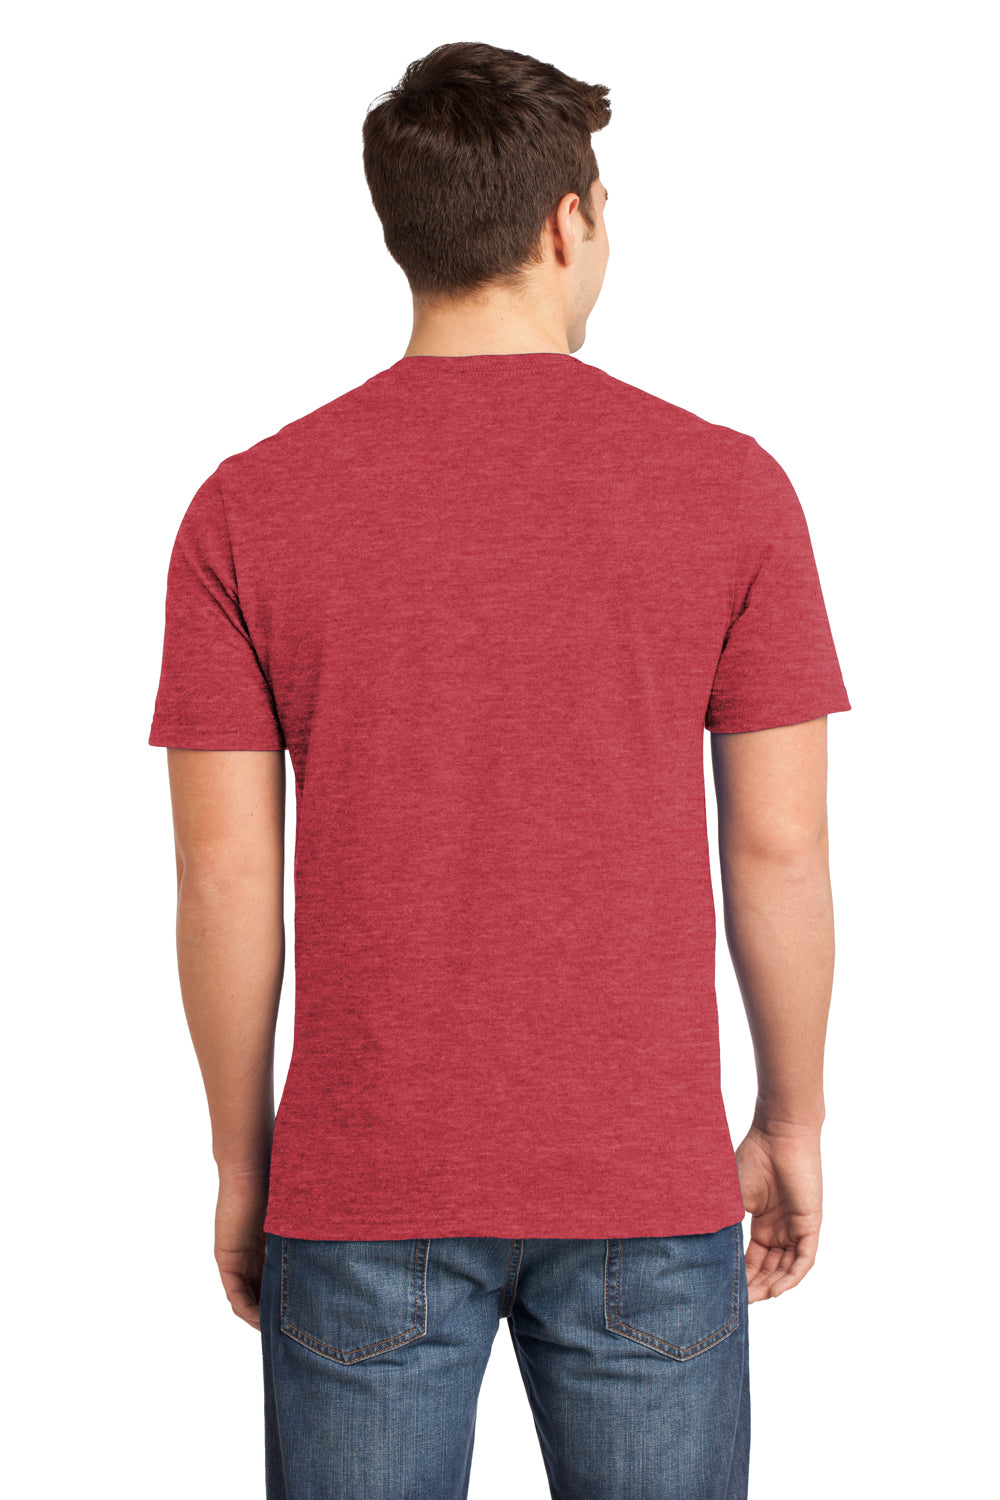 District DT6000 Mens Very Important Short Sleeve Crewneck T-Shirt Heather Red Back